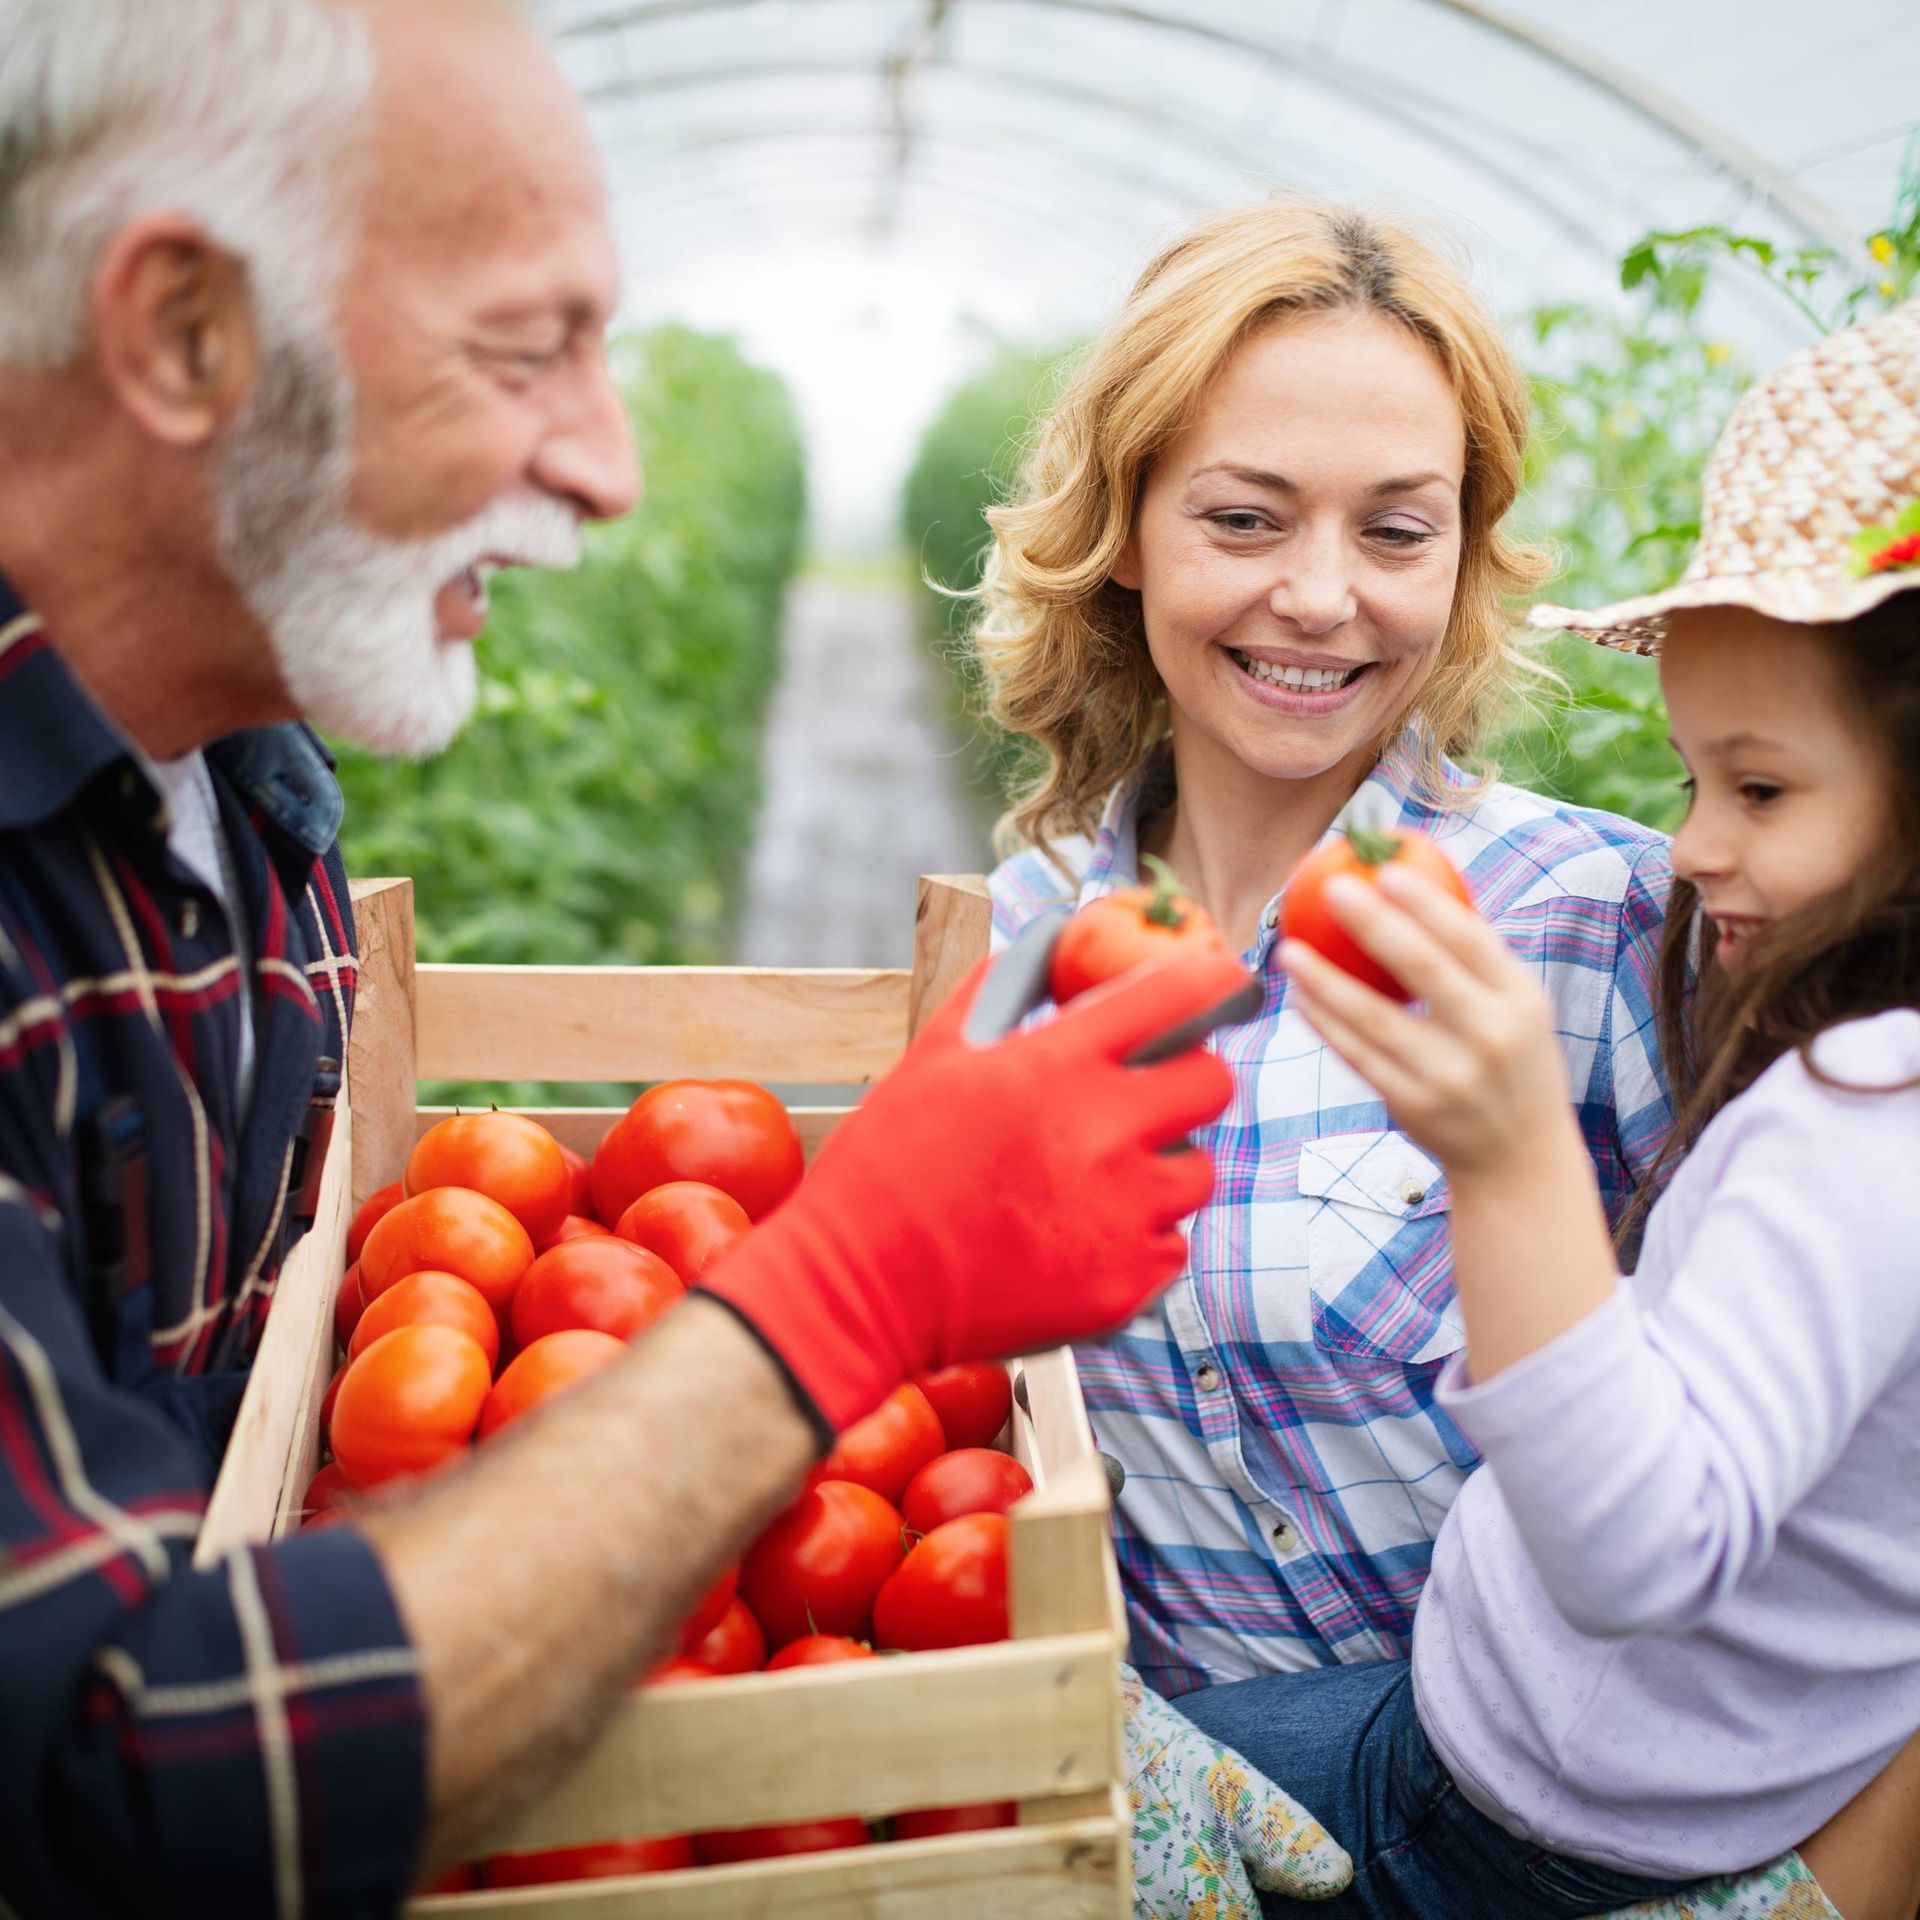 Image of a producer showing fresh produce to a family in a greenhouse